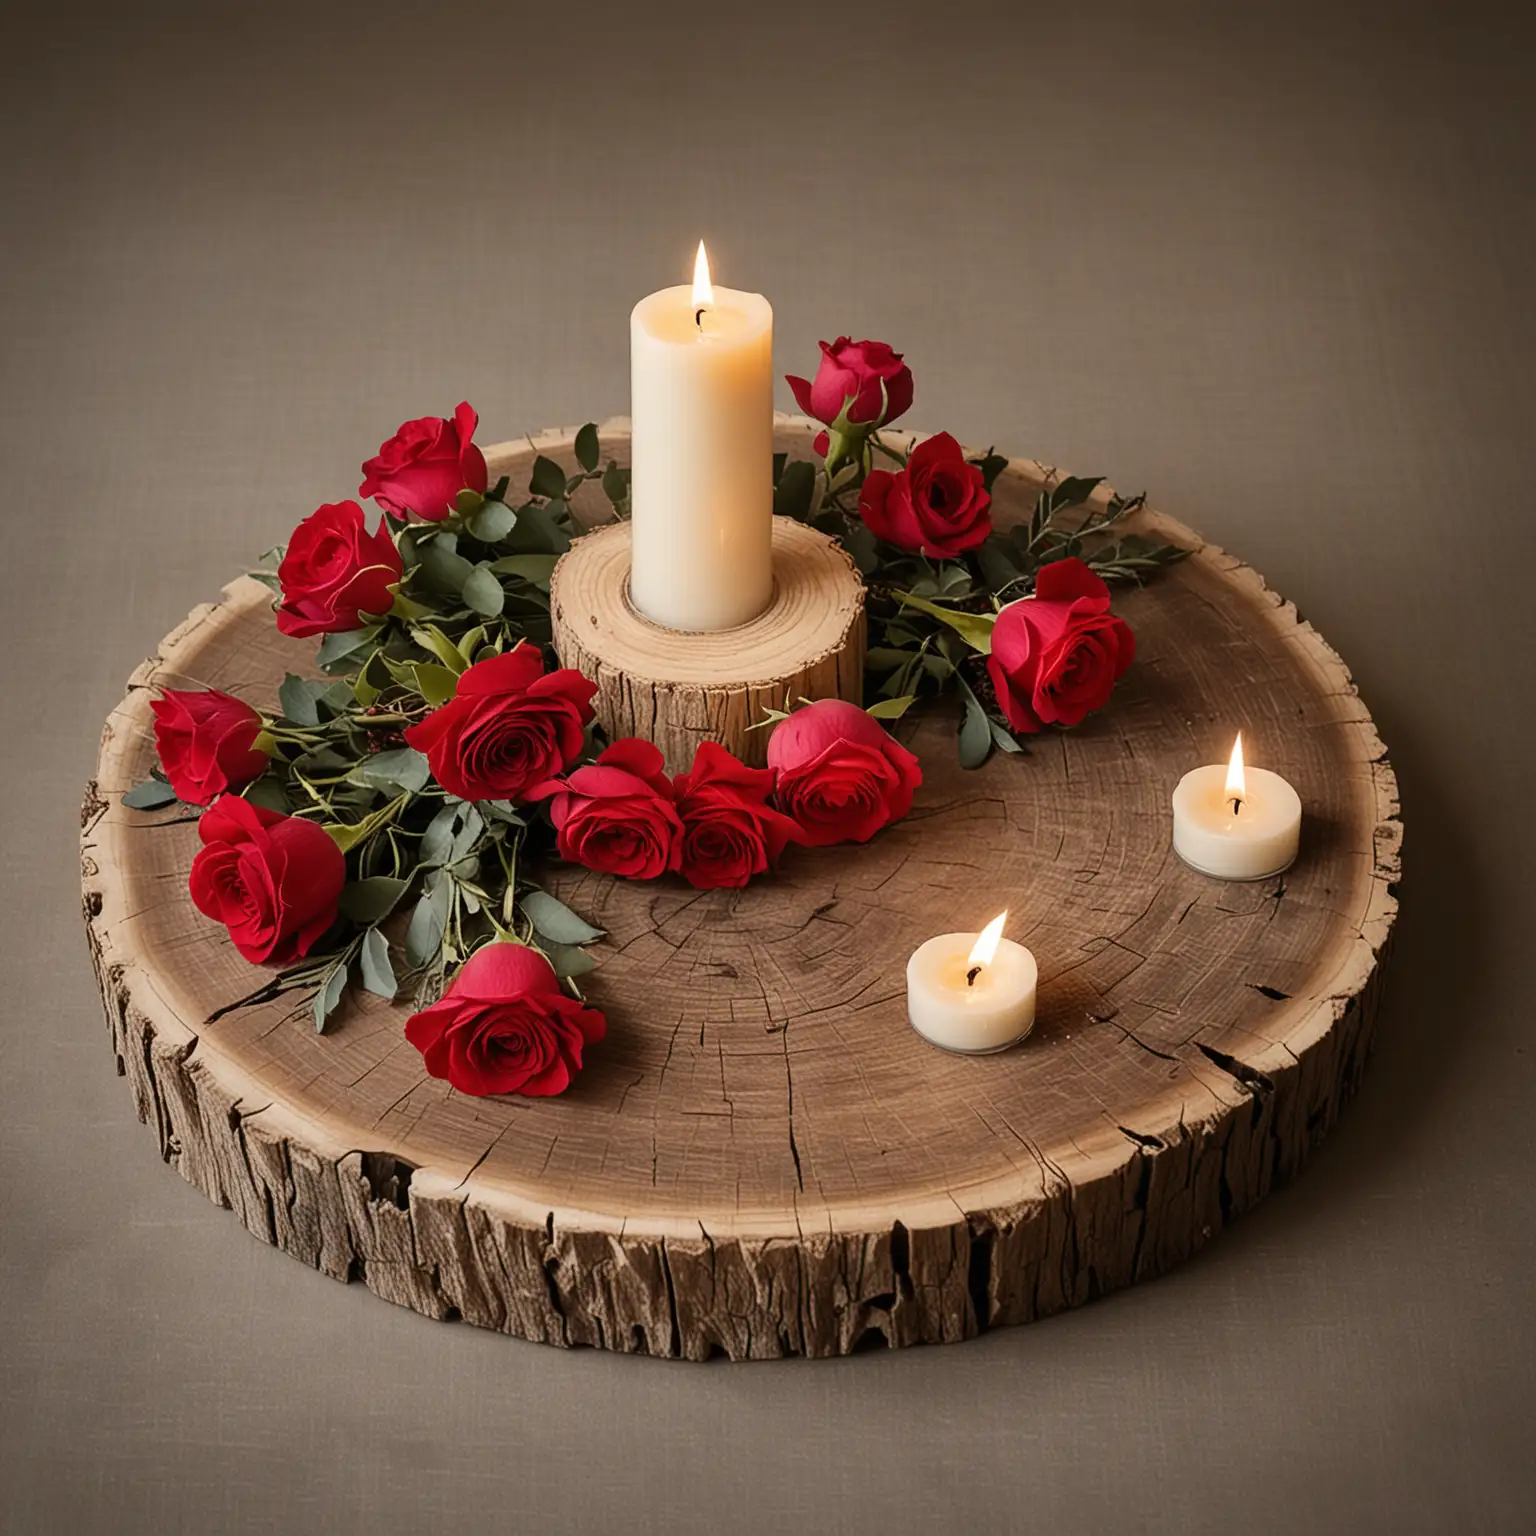 Rustic-Wooden-Candle-Holder-with-Red-Rose-Centerpiece